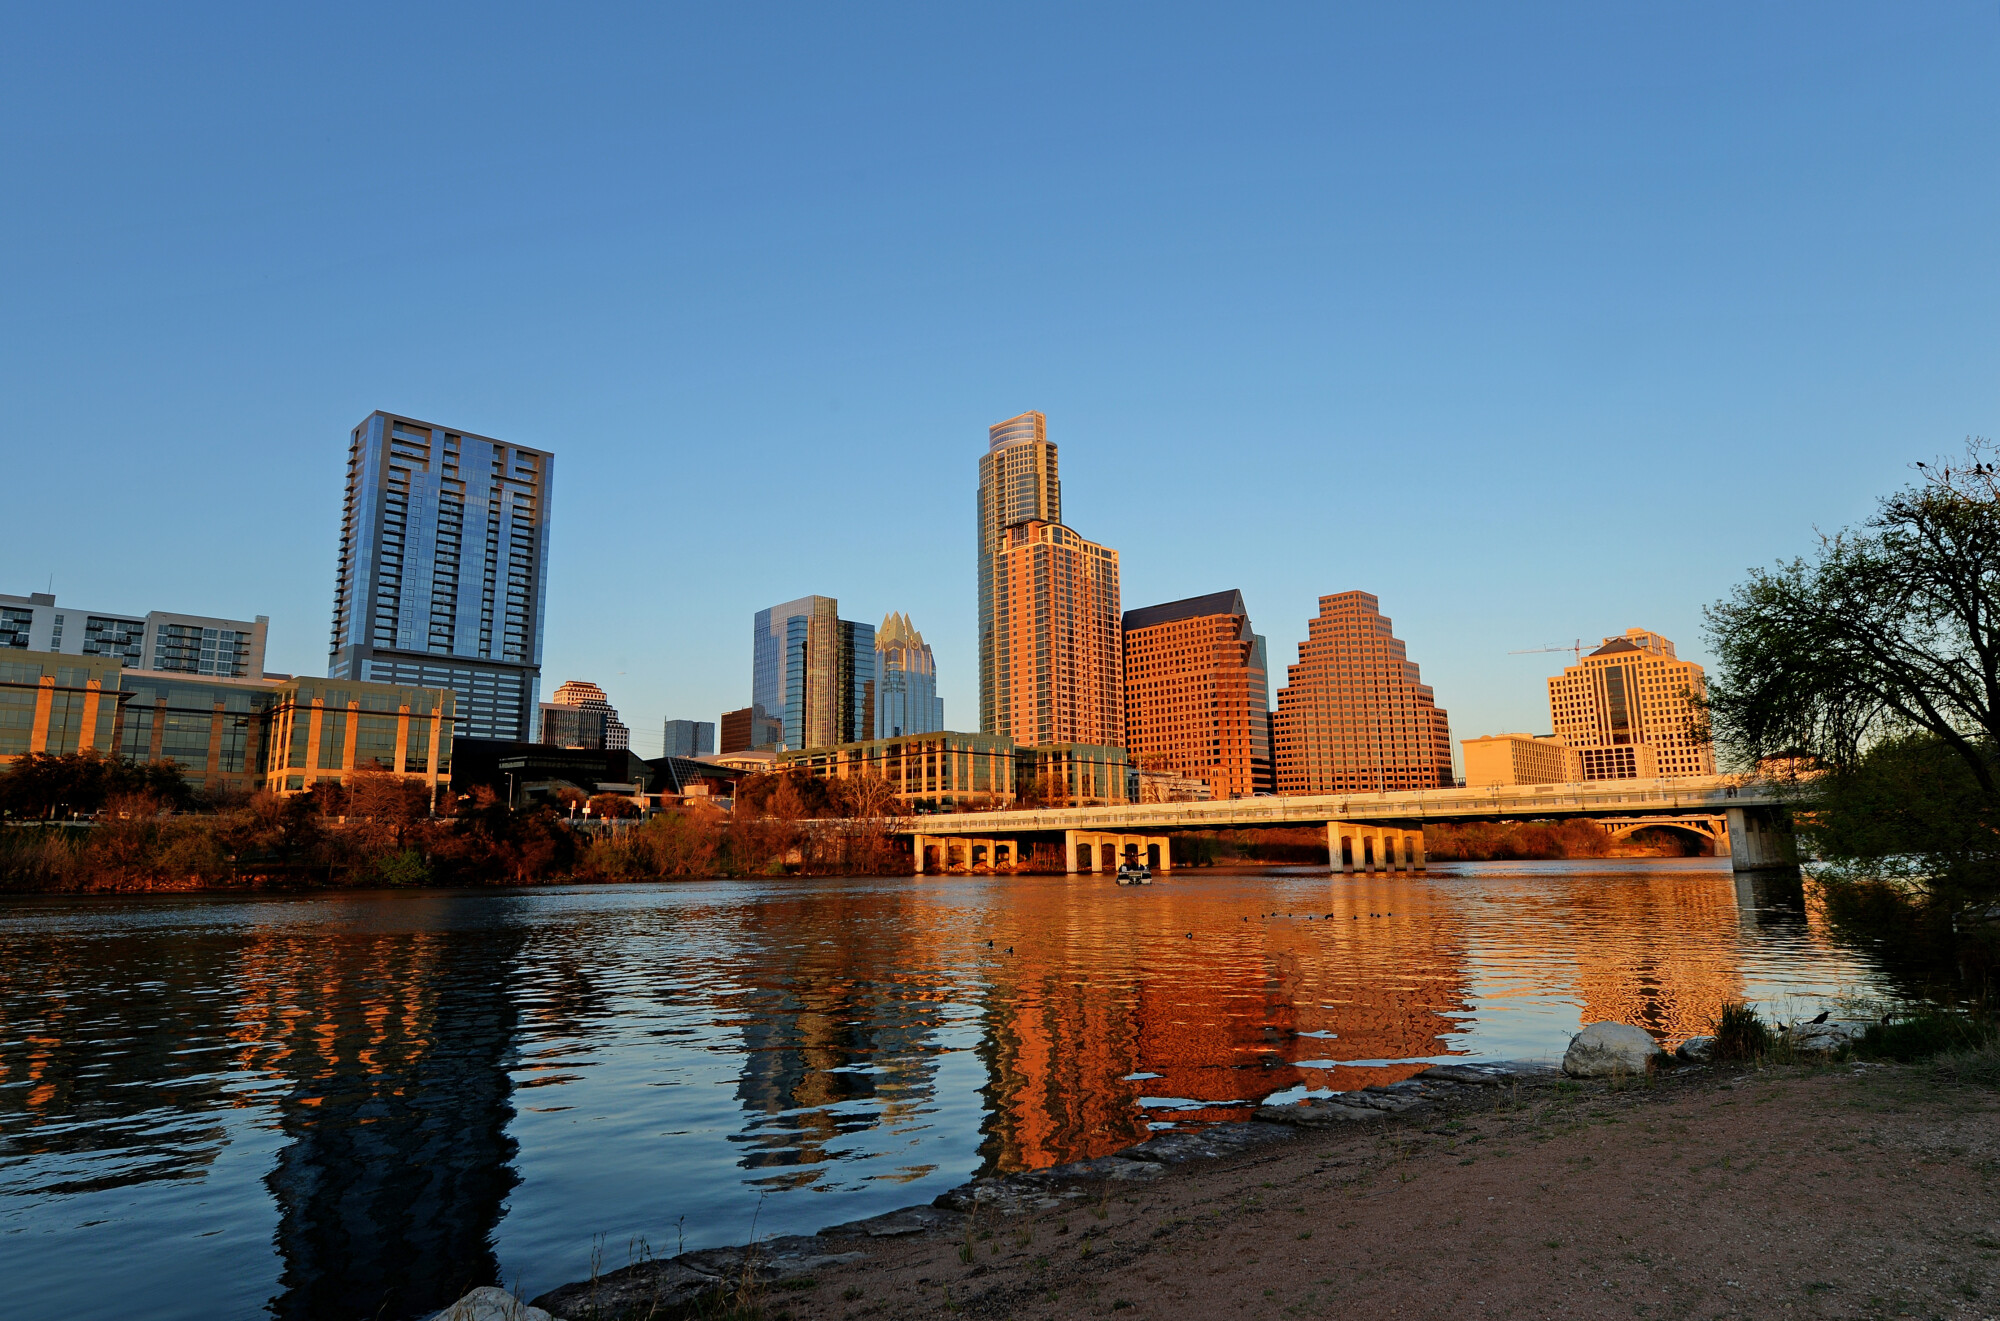 Austin Rental Property Management: Full-Service for Your Business